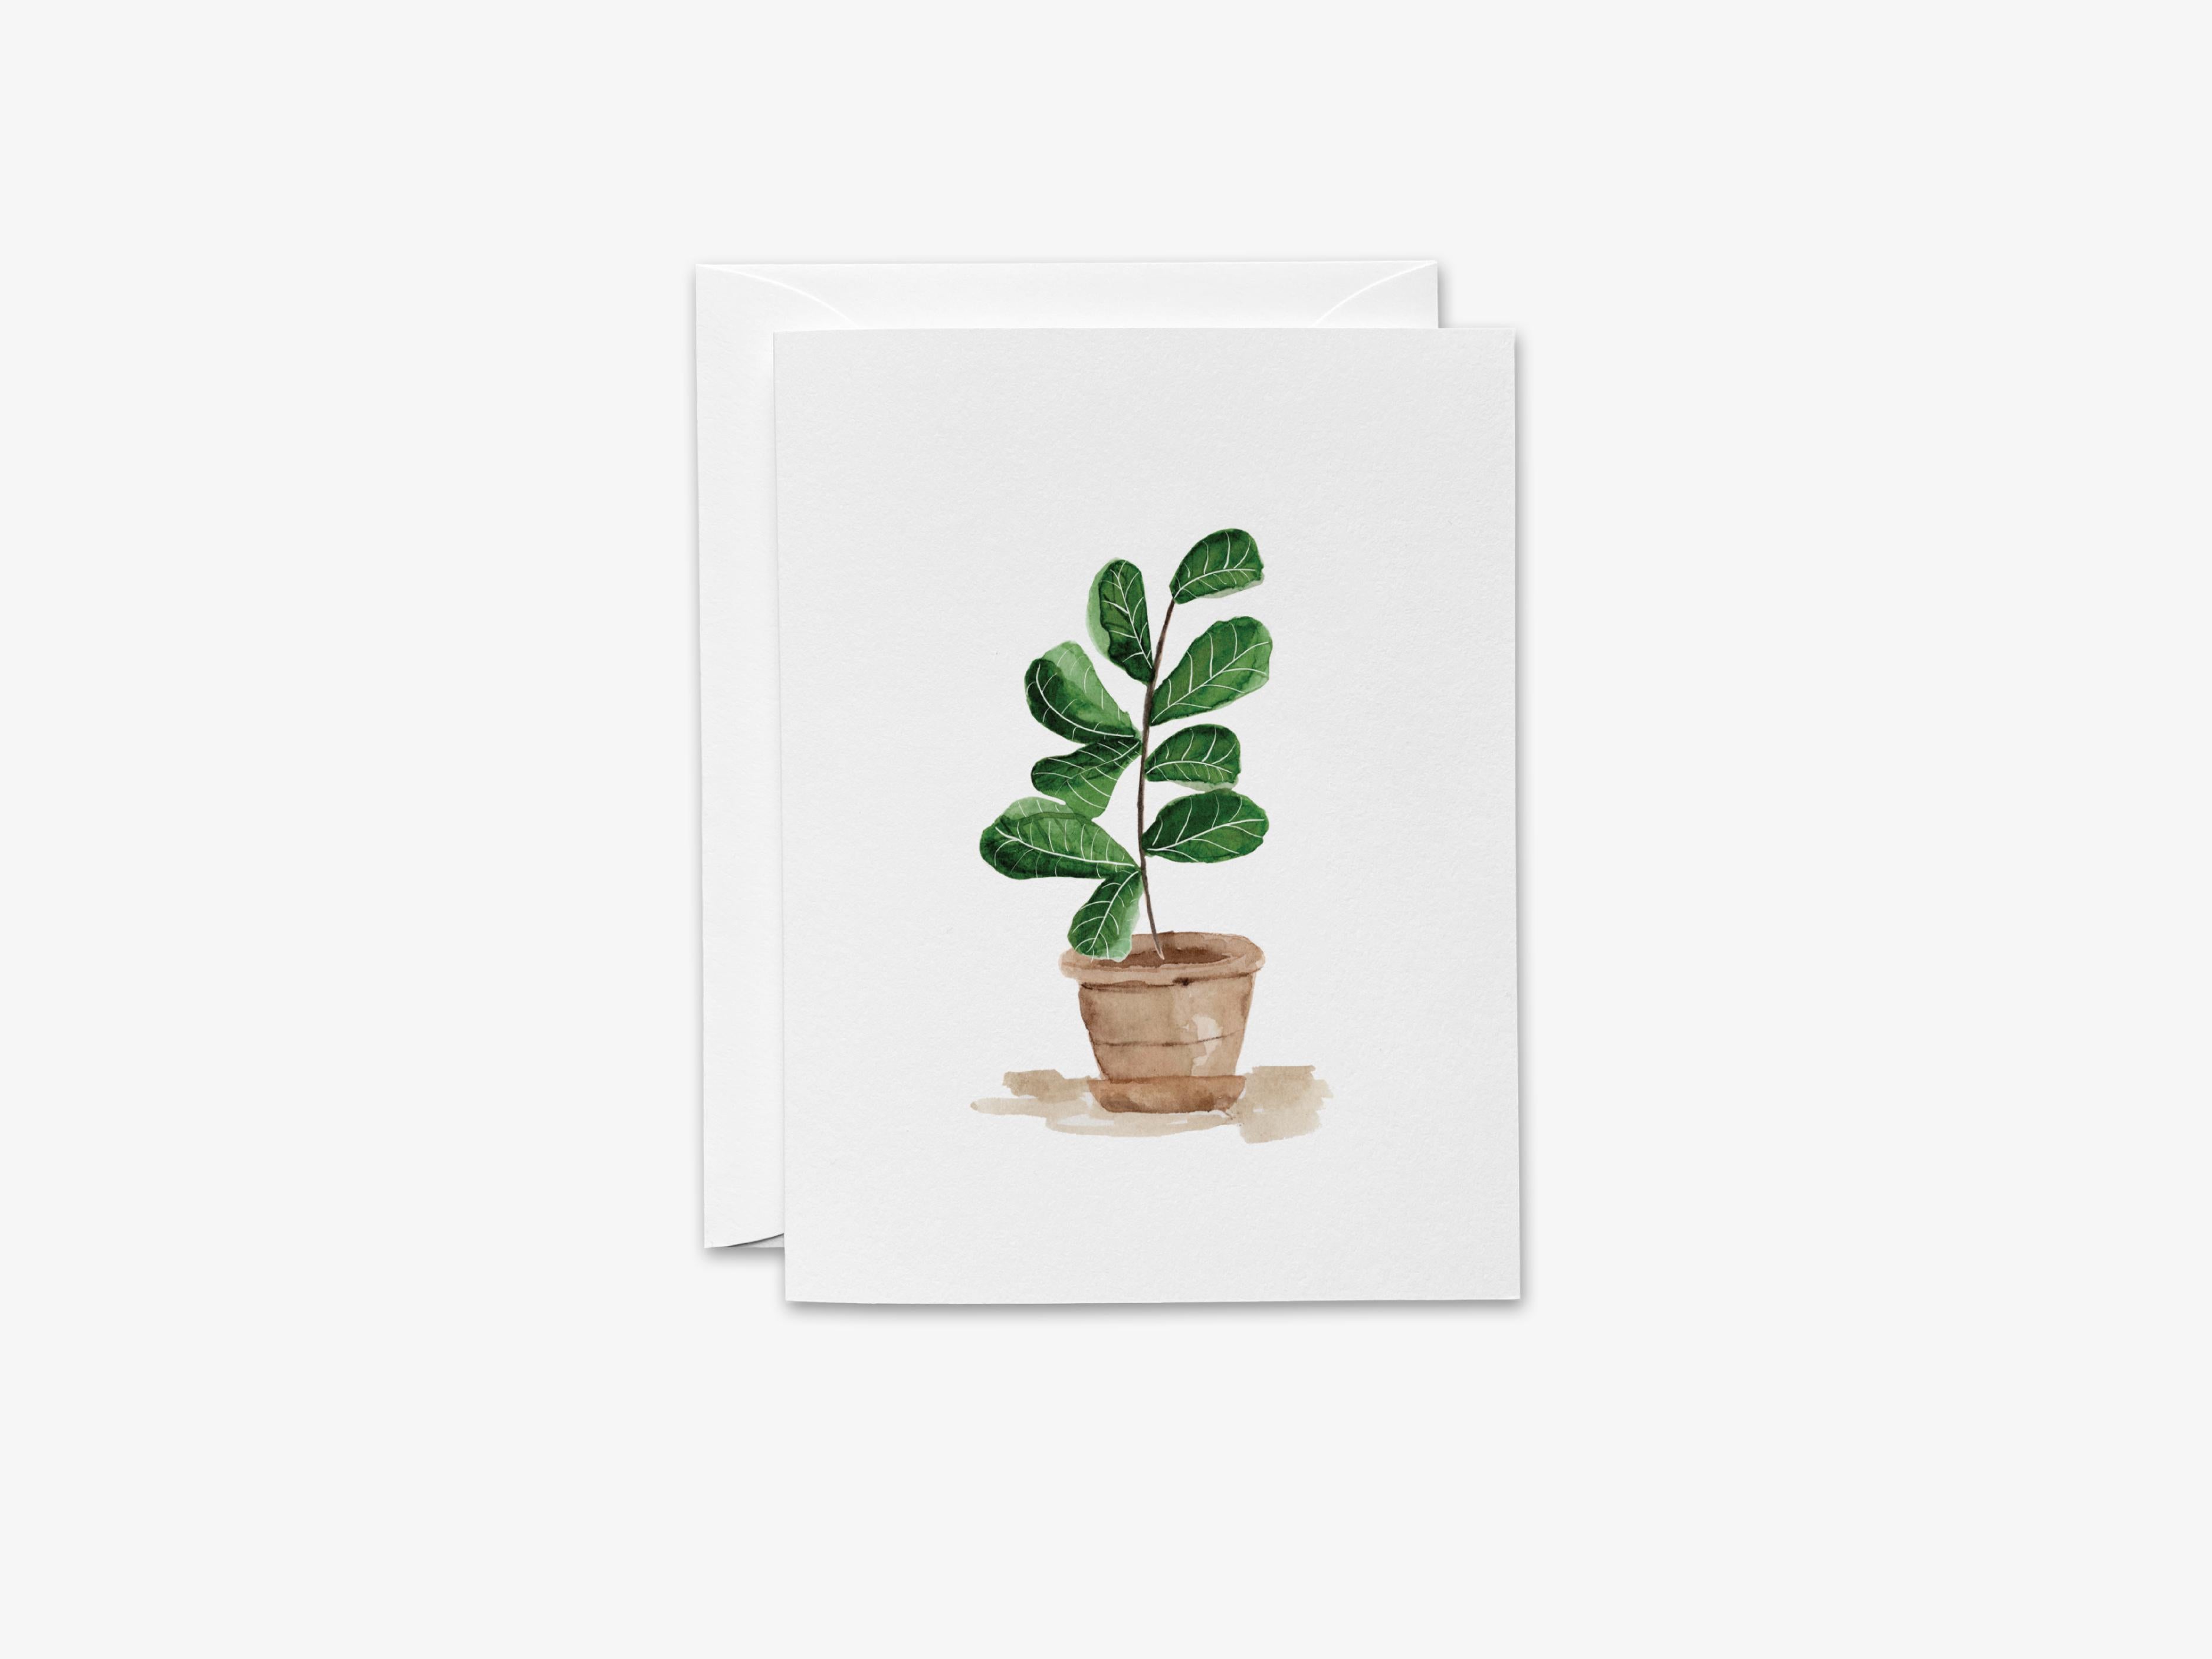 Fiddle Leaf Fig Greeting Card-These folded greeting cards are 4.25x5.5 and feature our hand-painted fiddle leaf fig, printed in the USA on 100lb textured stock. They come with a White envelope and make a great thinking of you card for the plant lover in your life.-The Singing Little Bird